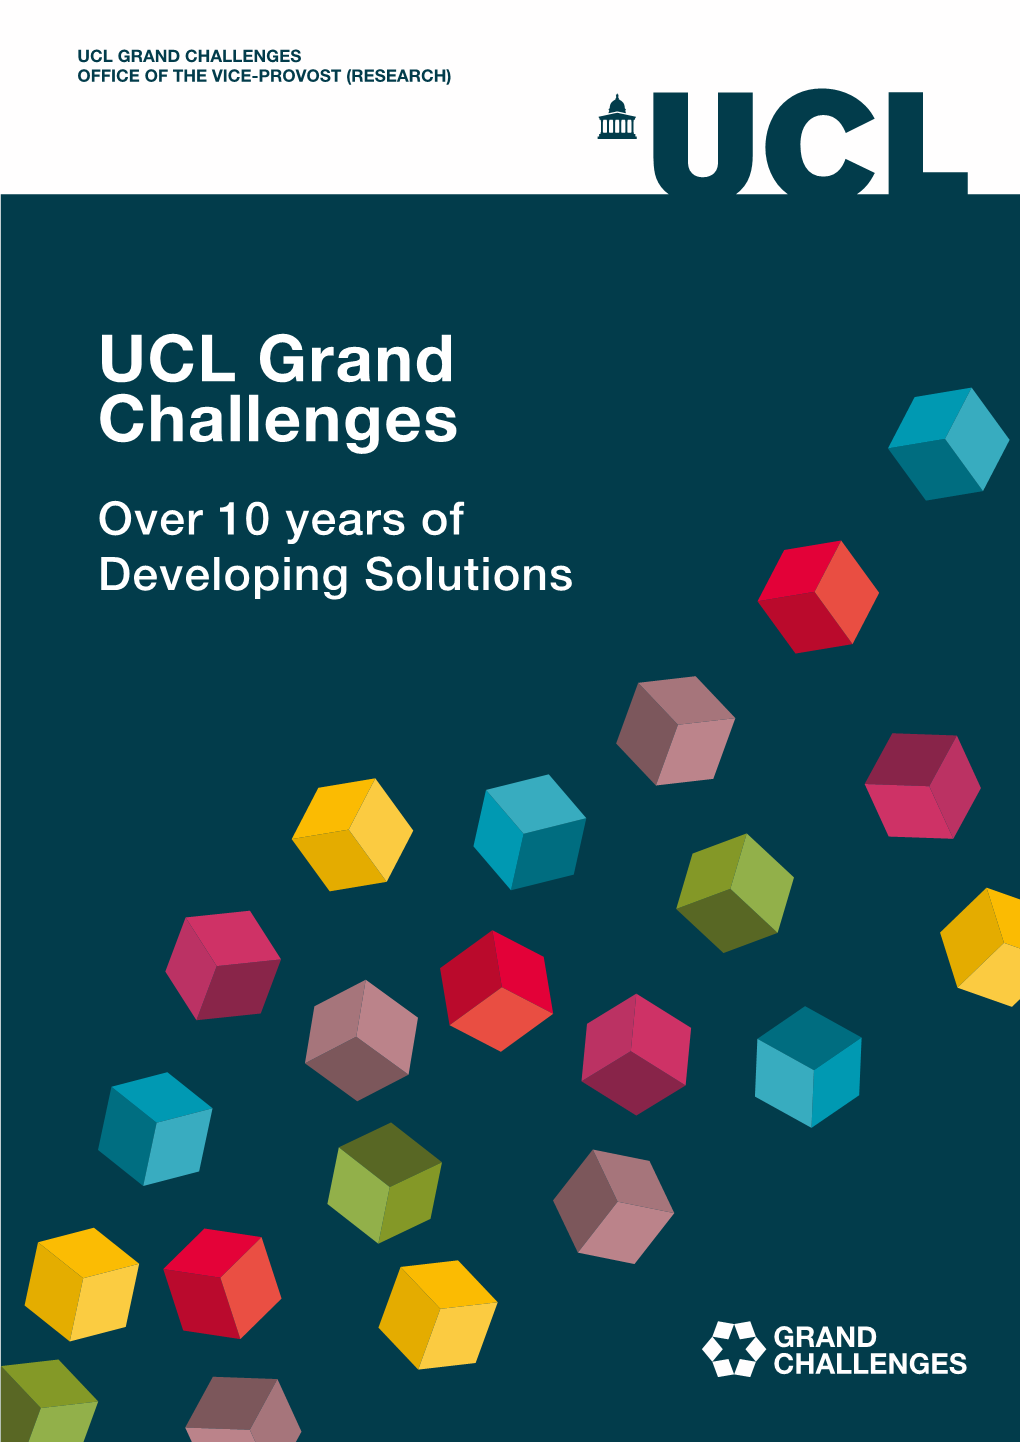 10 Years of UCL Grand Challenges, Connect, Inspire, and Prepare for the Unexpected